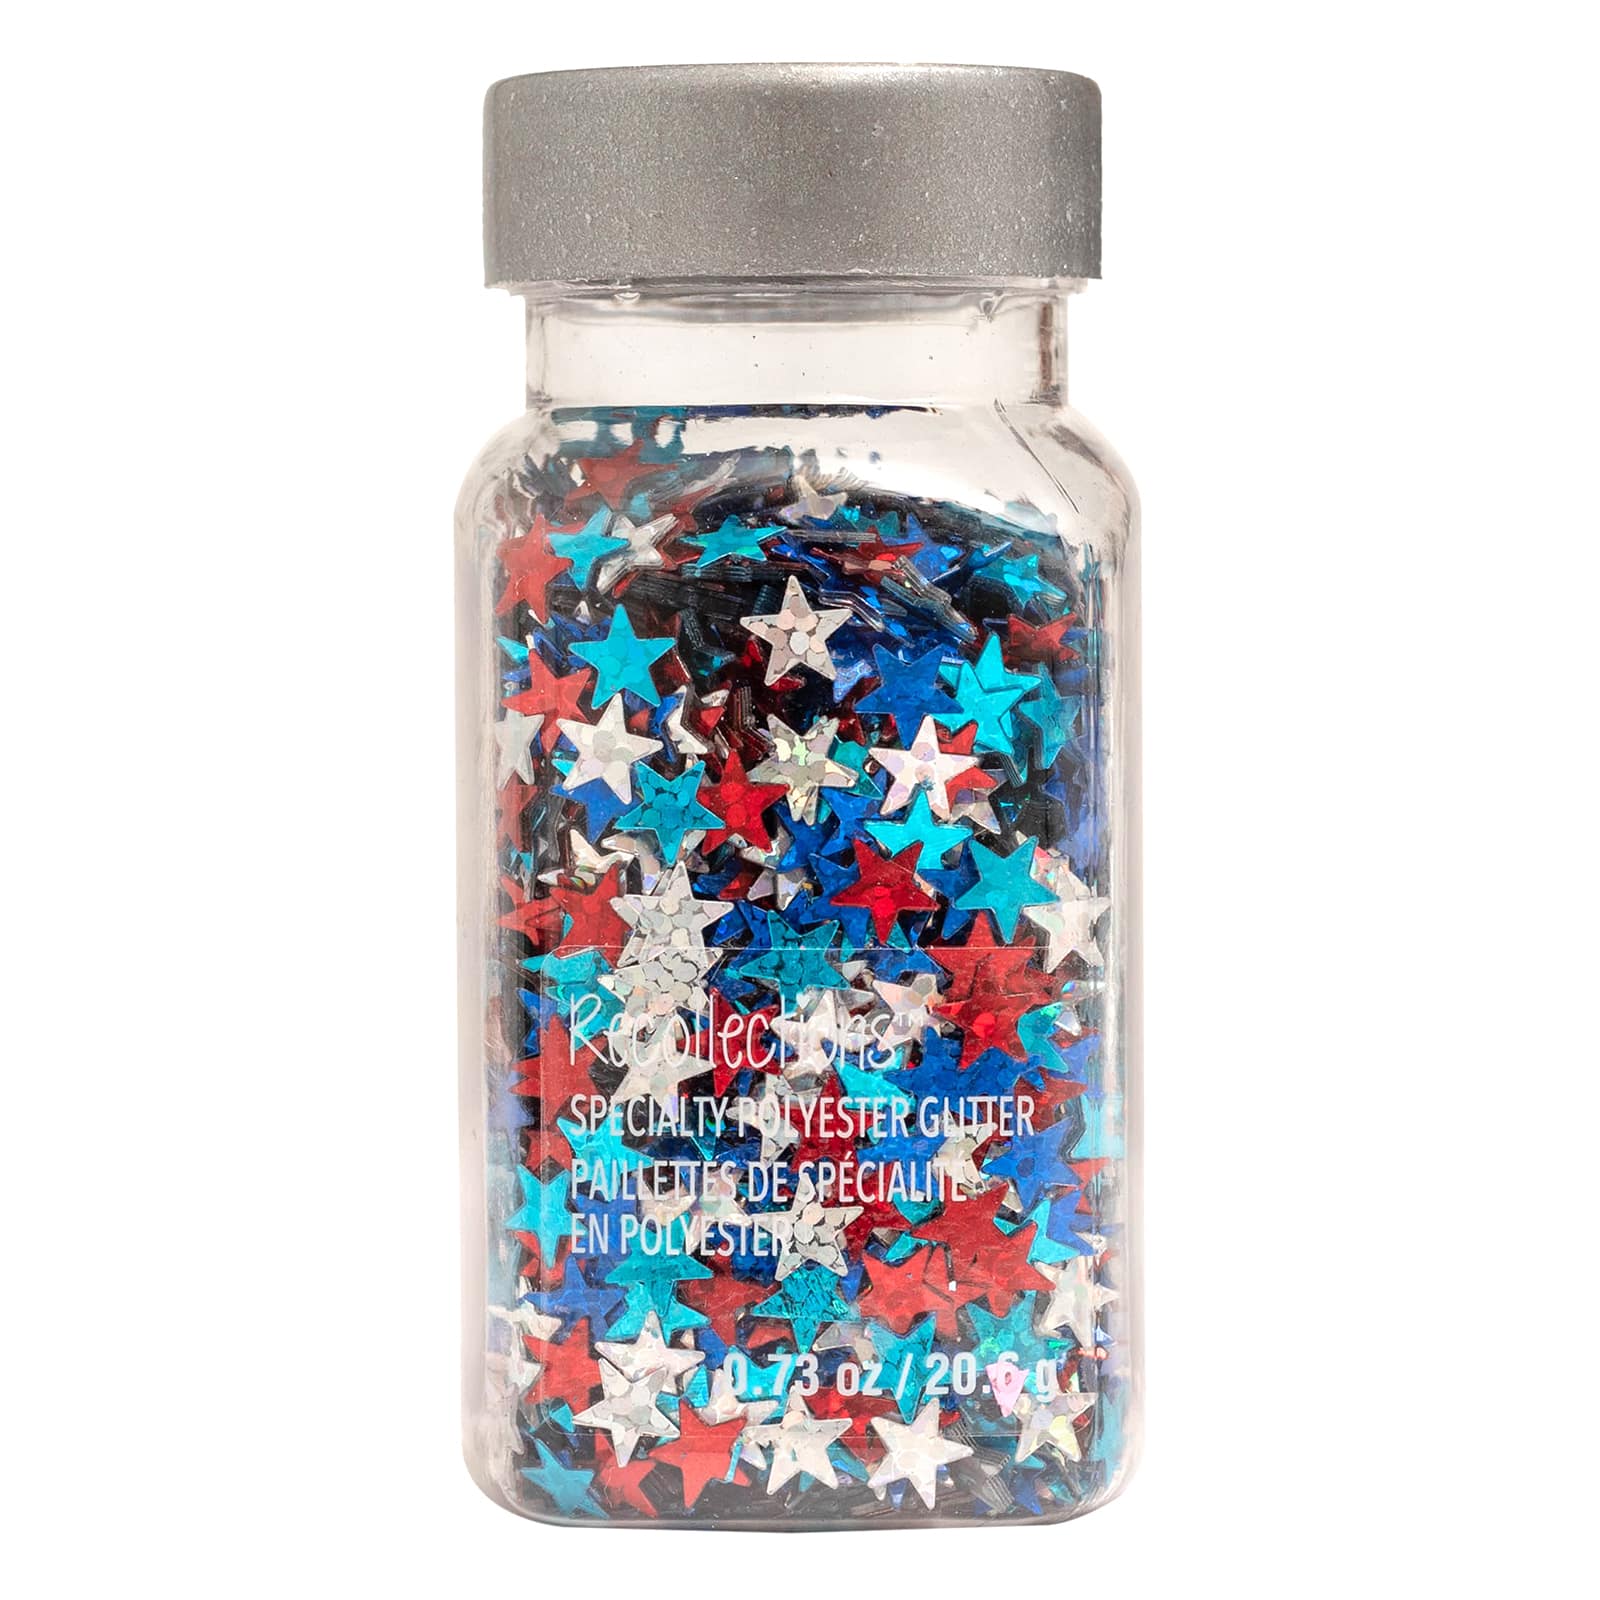 Silver Star Glitter by Recollections™